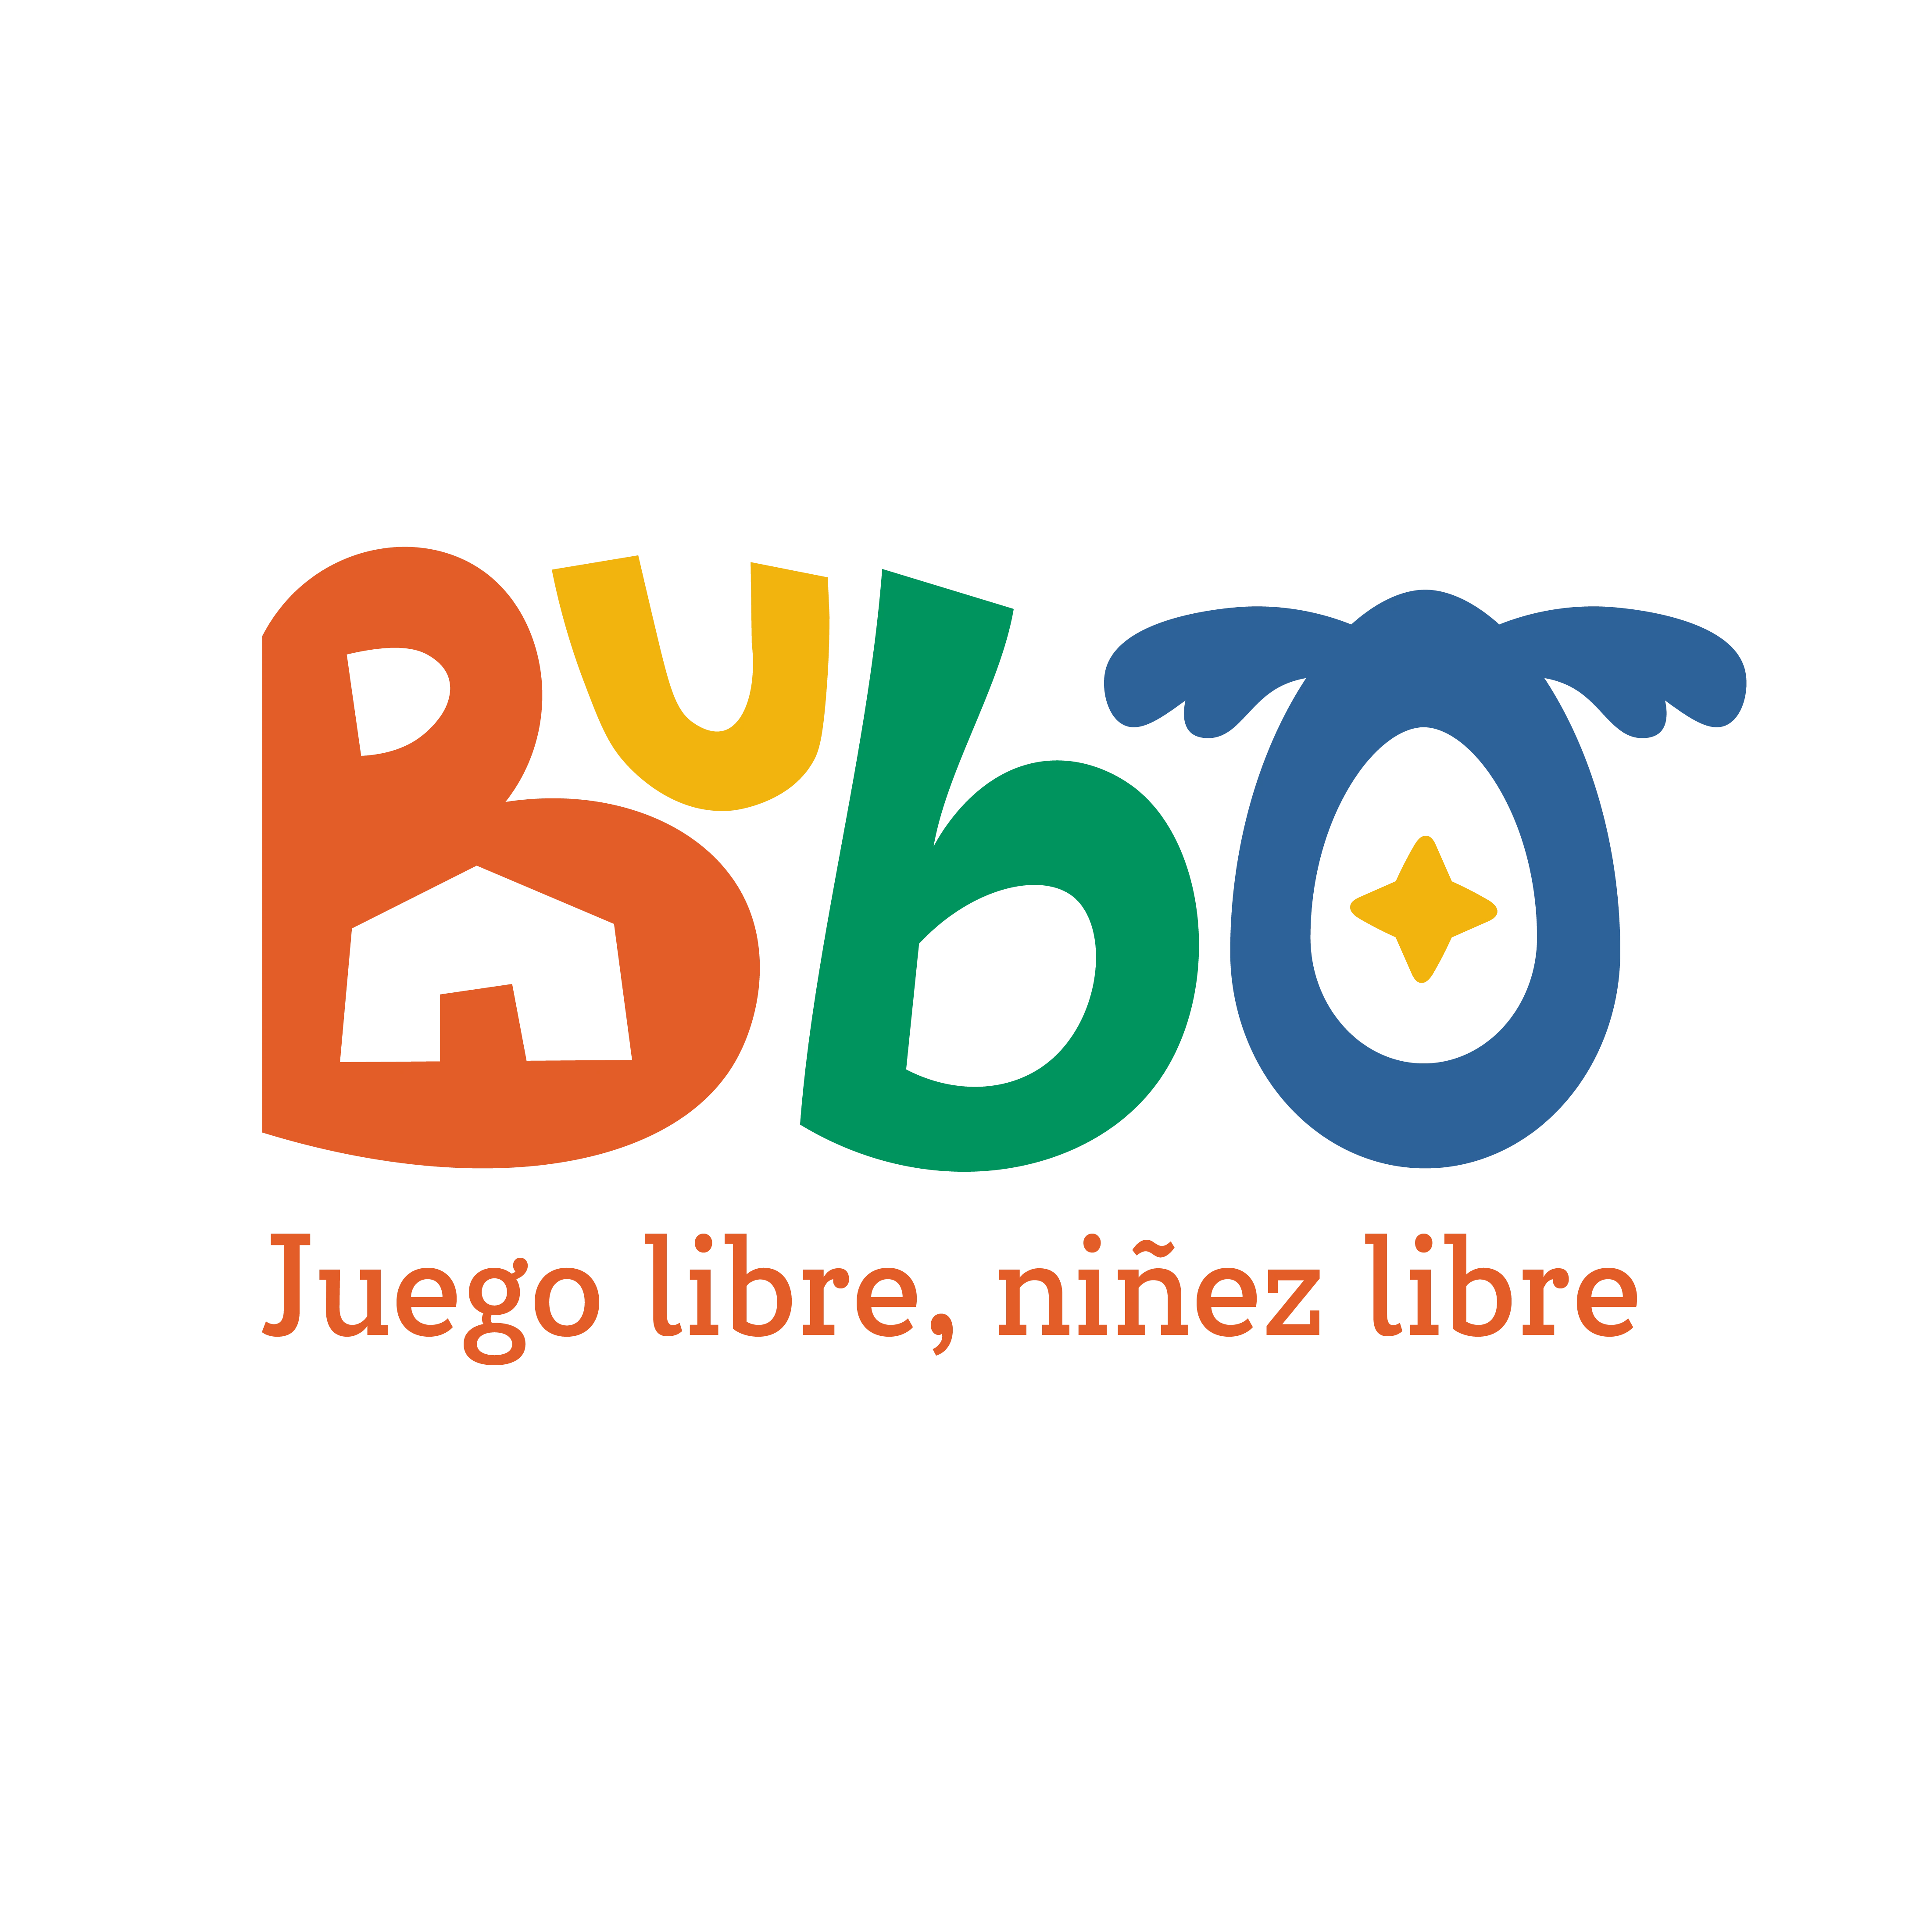 1587-bubo1-17184234884423.png